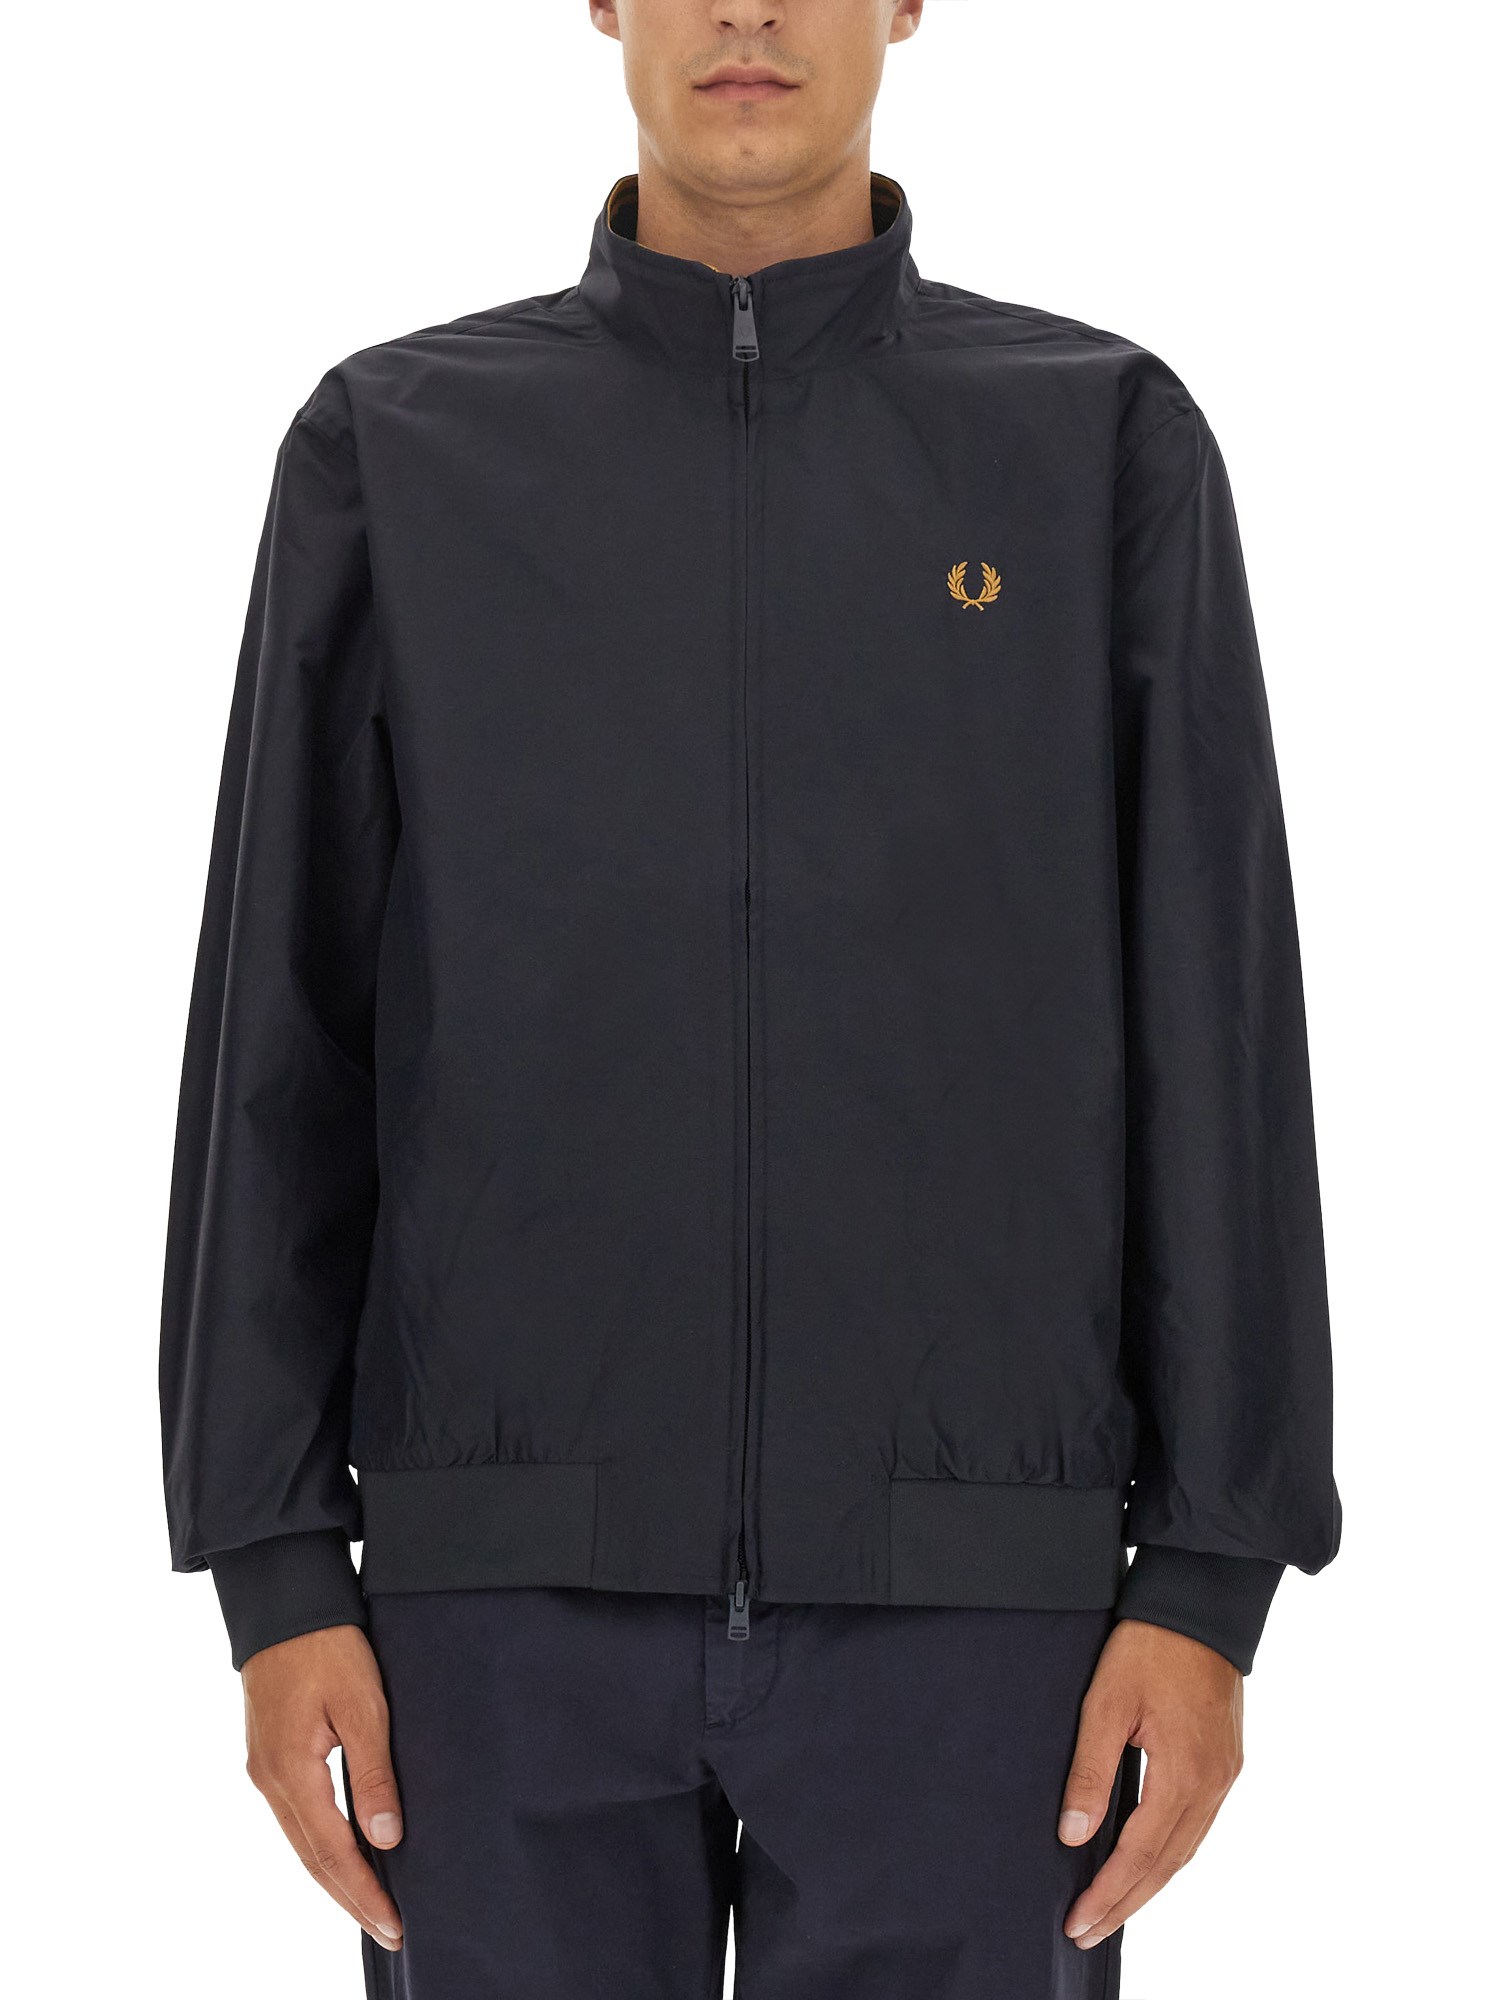 fred perry jacket with logo